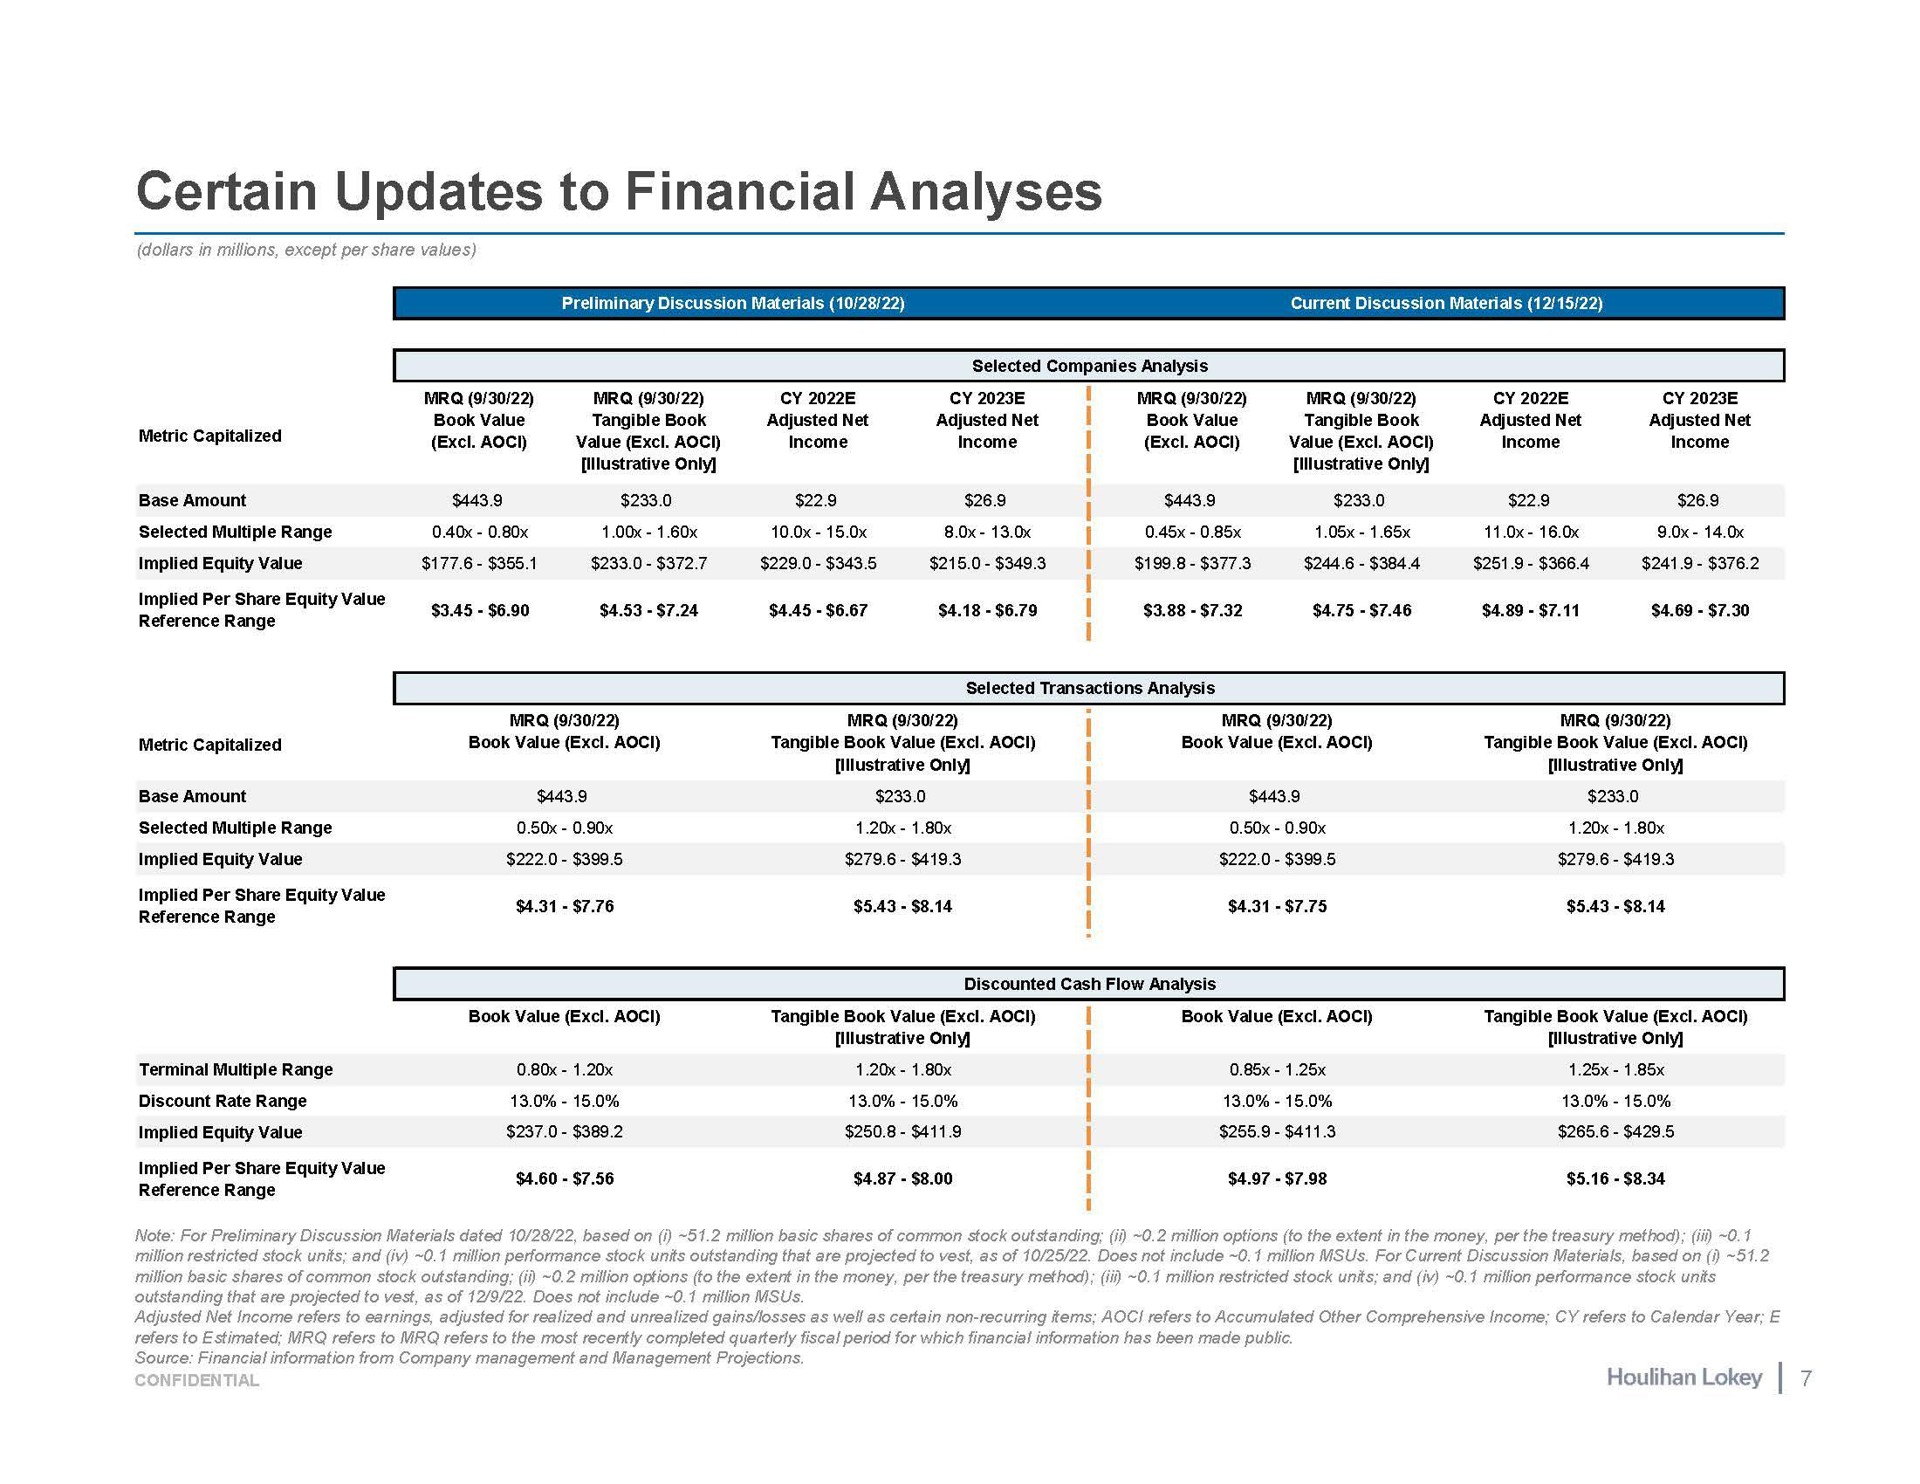 certain updates to financial analyses mae epee at | Houlihan Lokey